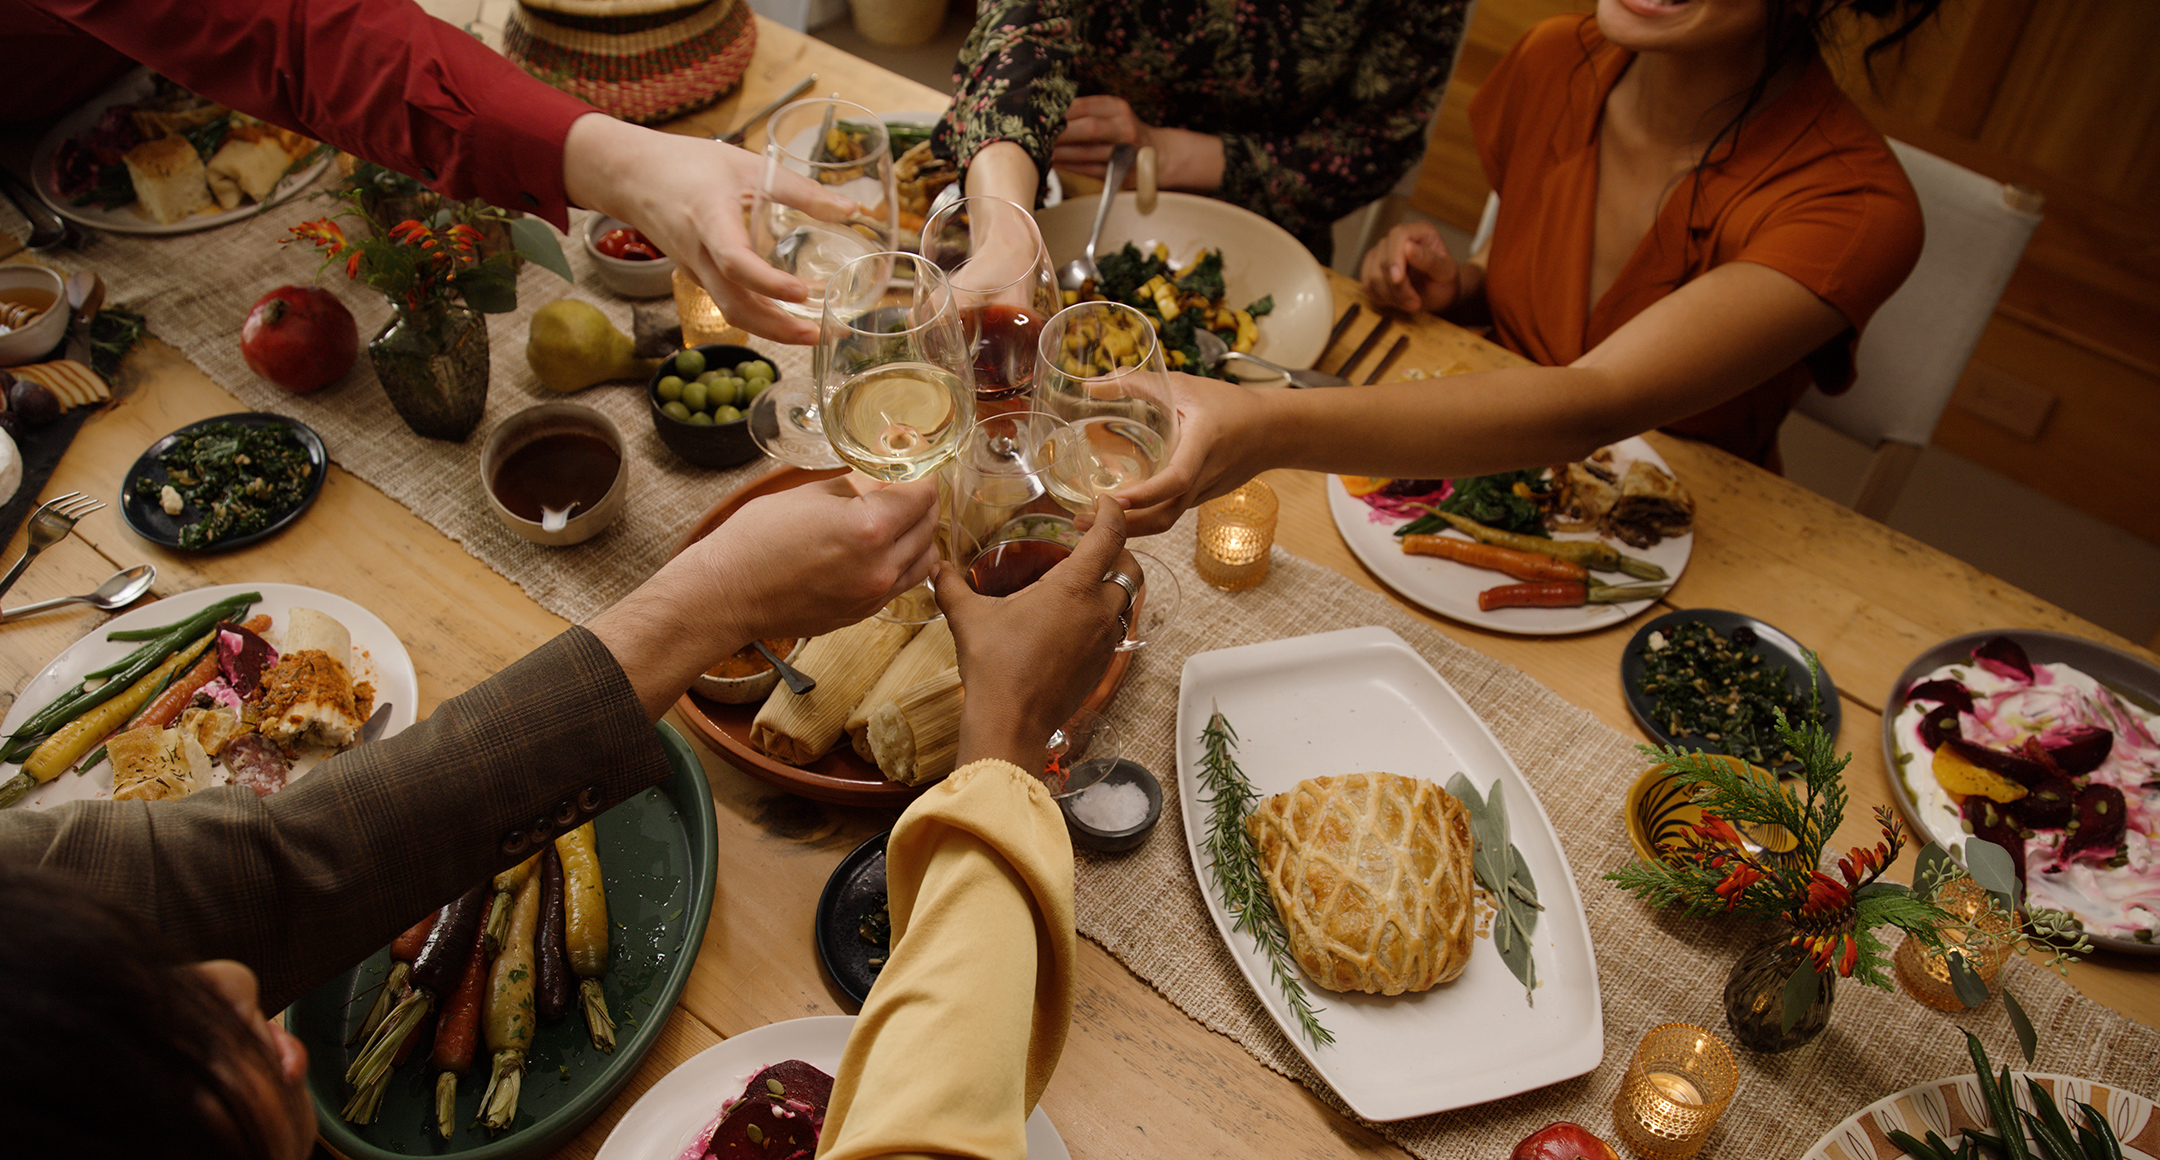 A video still featuring a celebratory holiday meal with friends and family sitting around a table toasting wine classed center table.